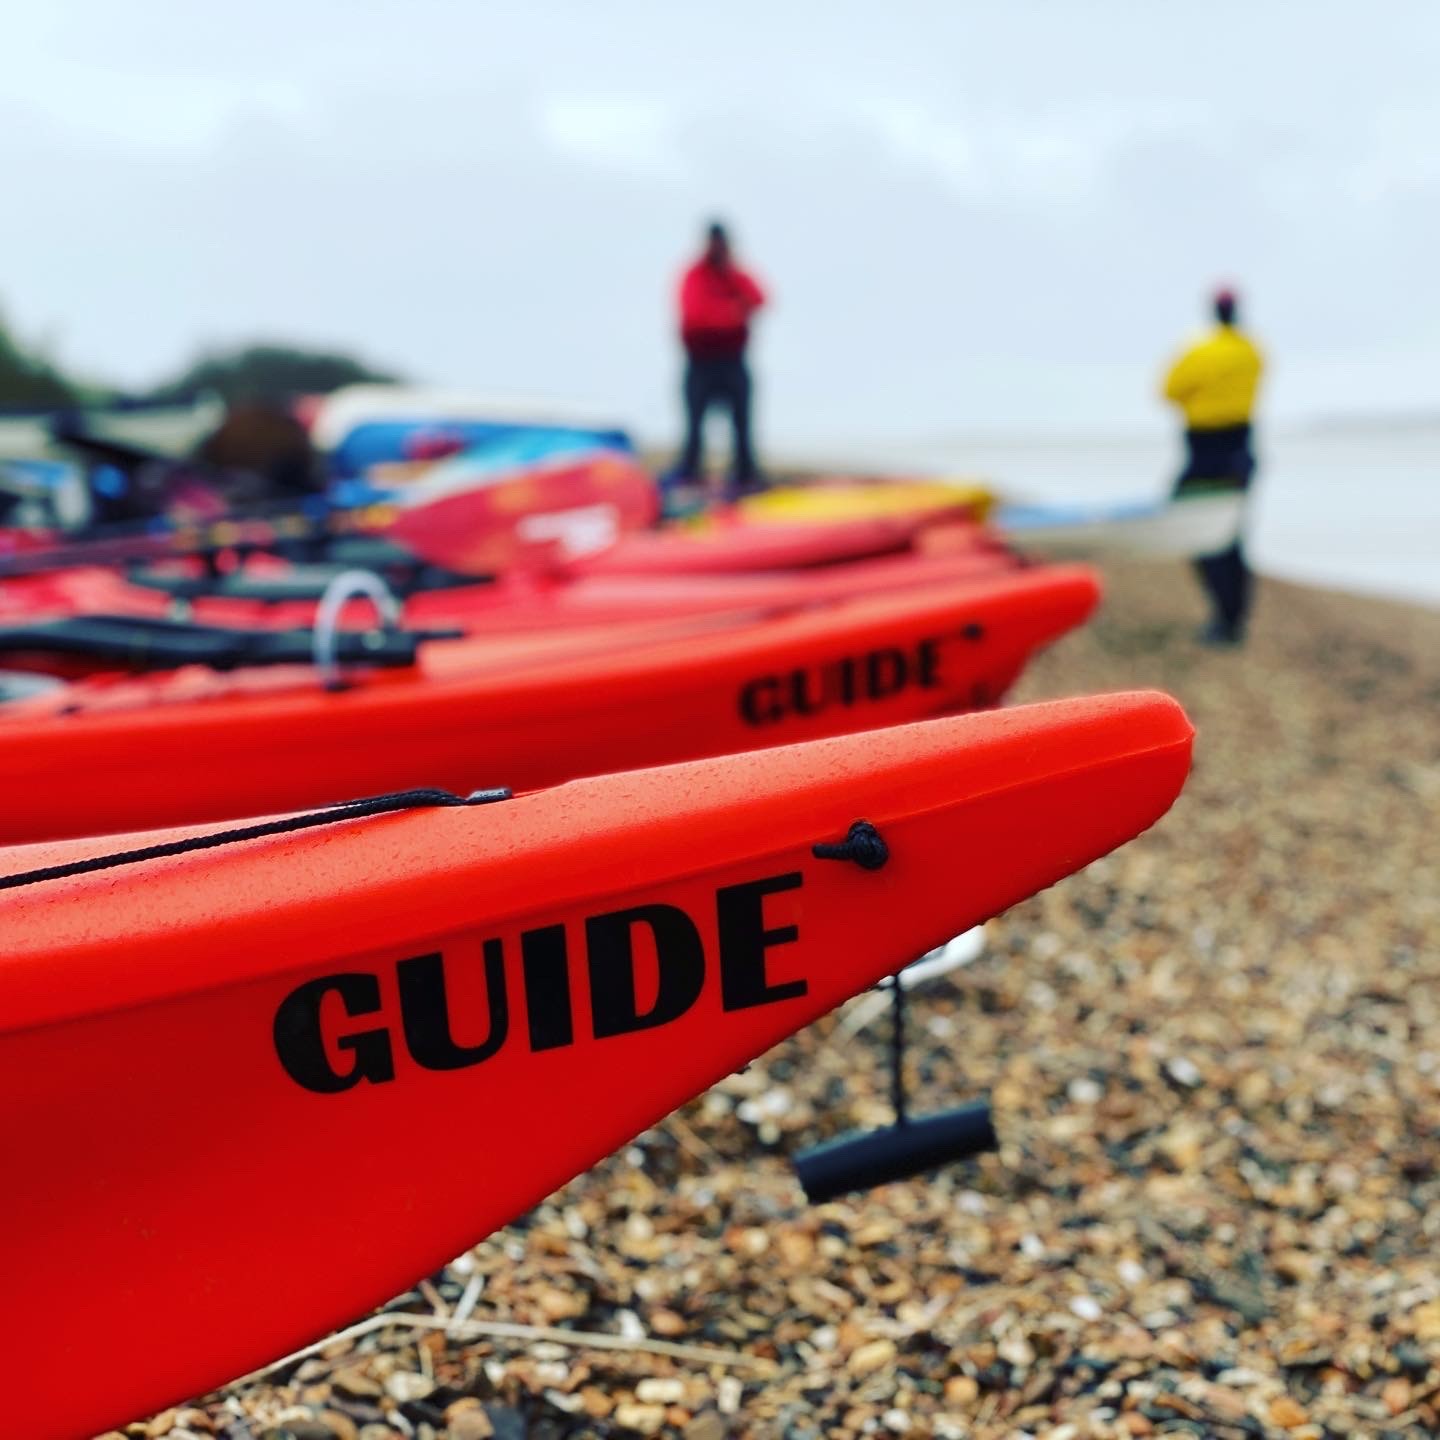 Guide sea kayaks ready for launch with NOMAD Sea Kayaking.